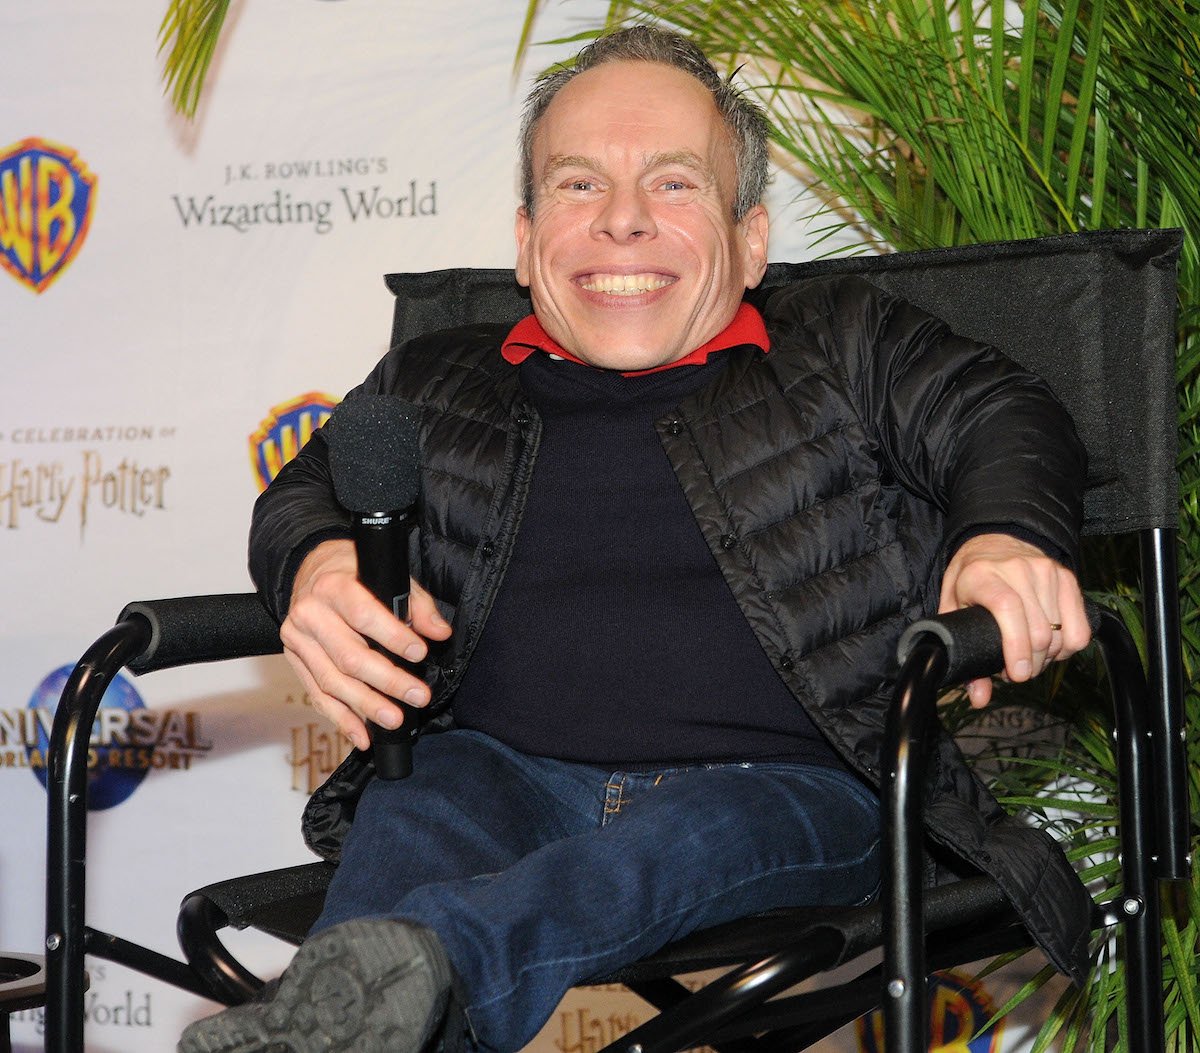 Actor Warwick Davis answers questions about Harry Potter at Universal Orlando in 2017